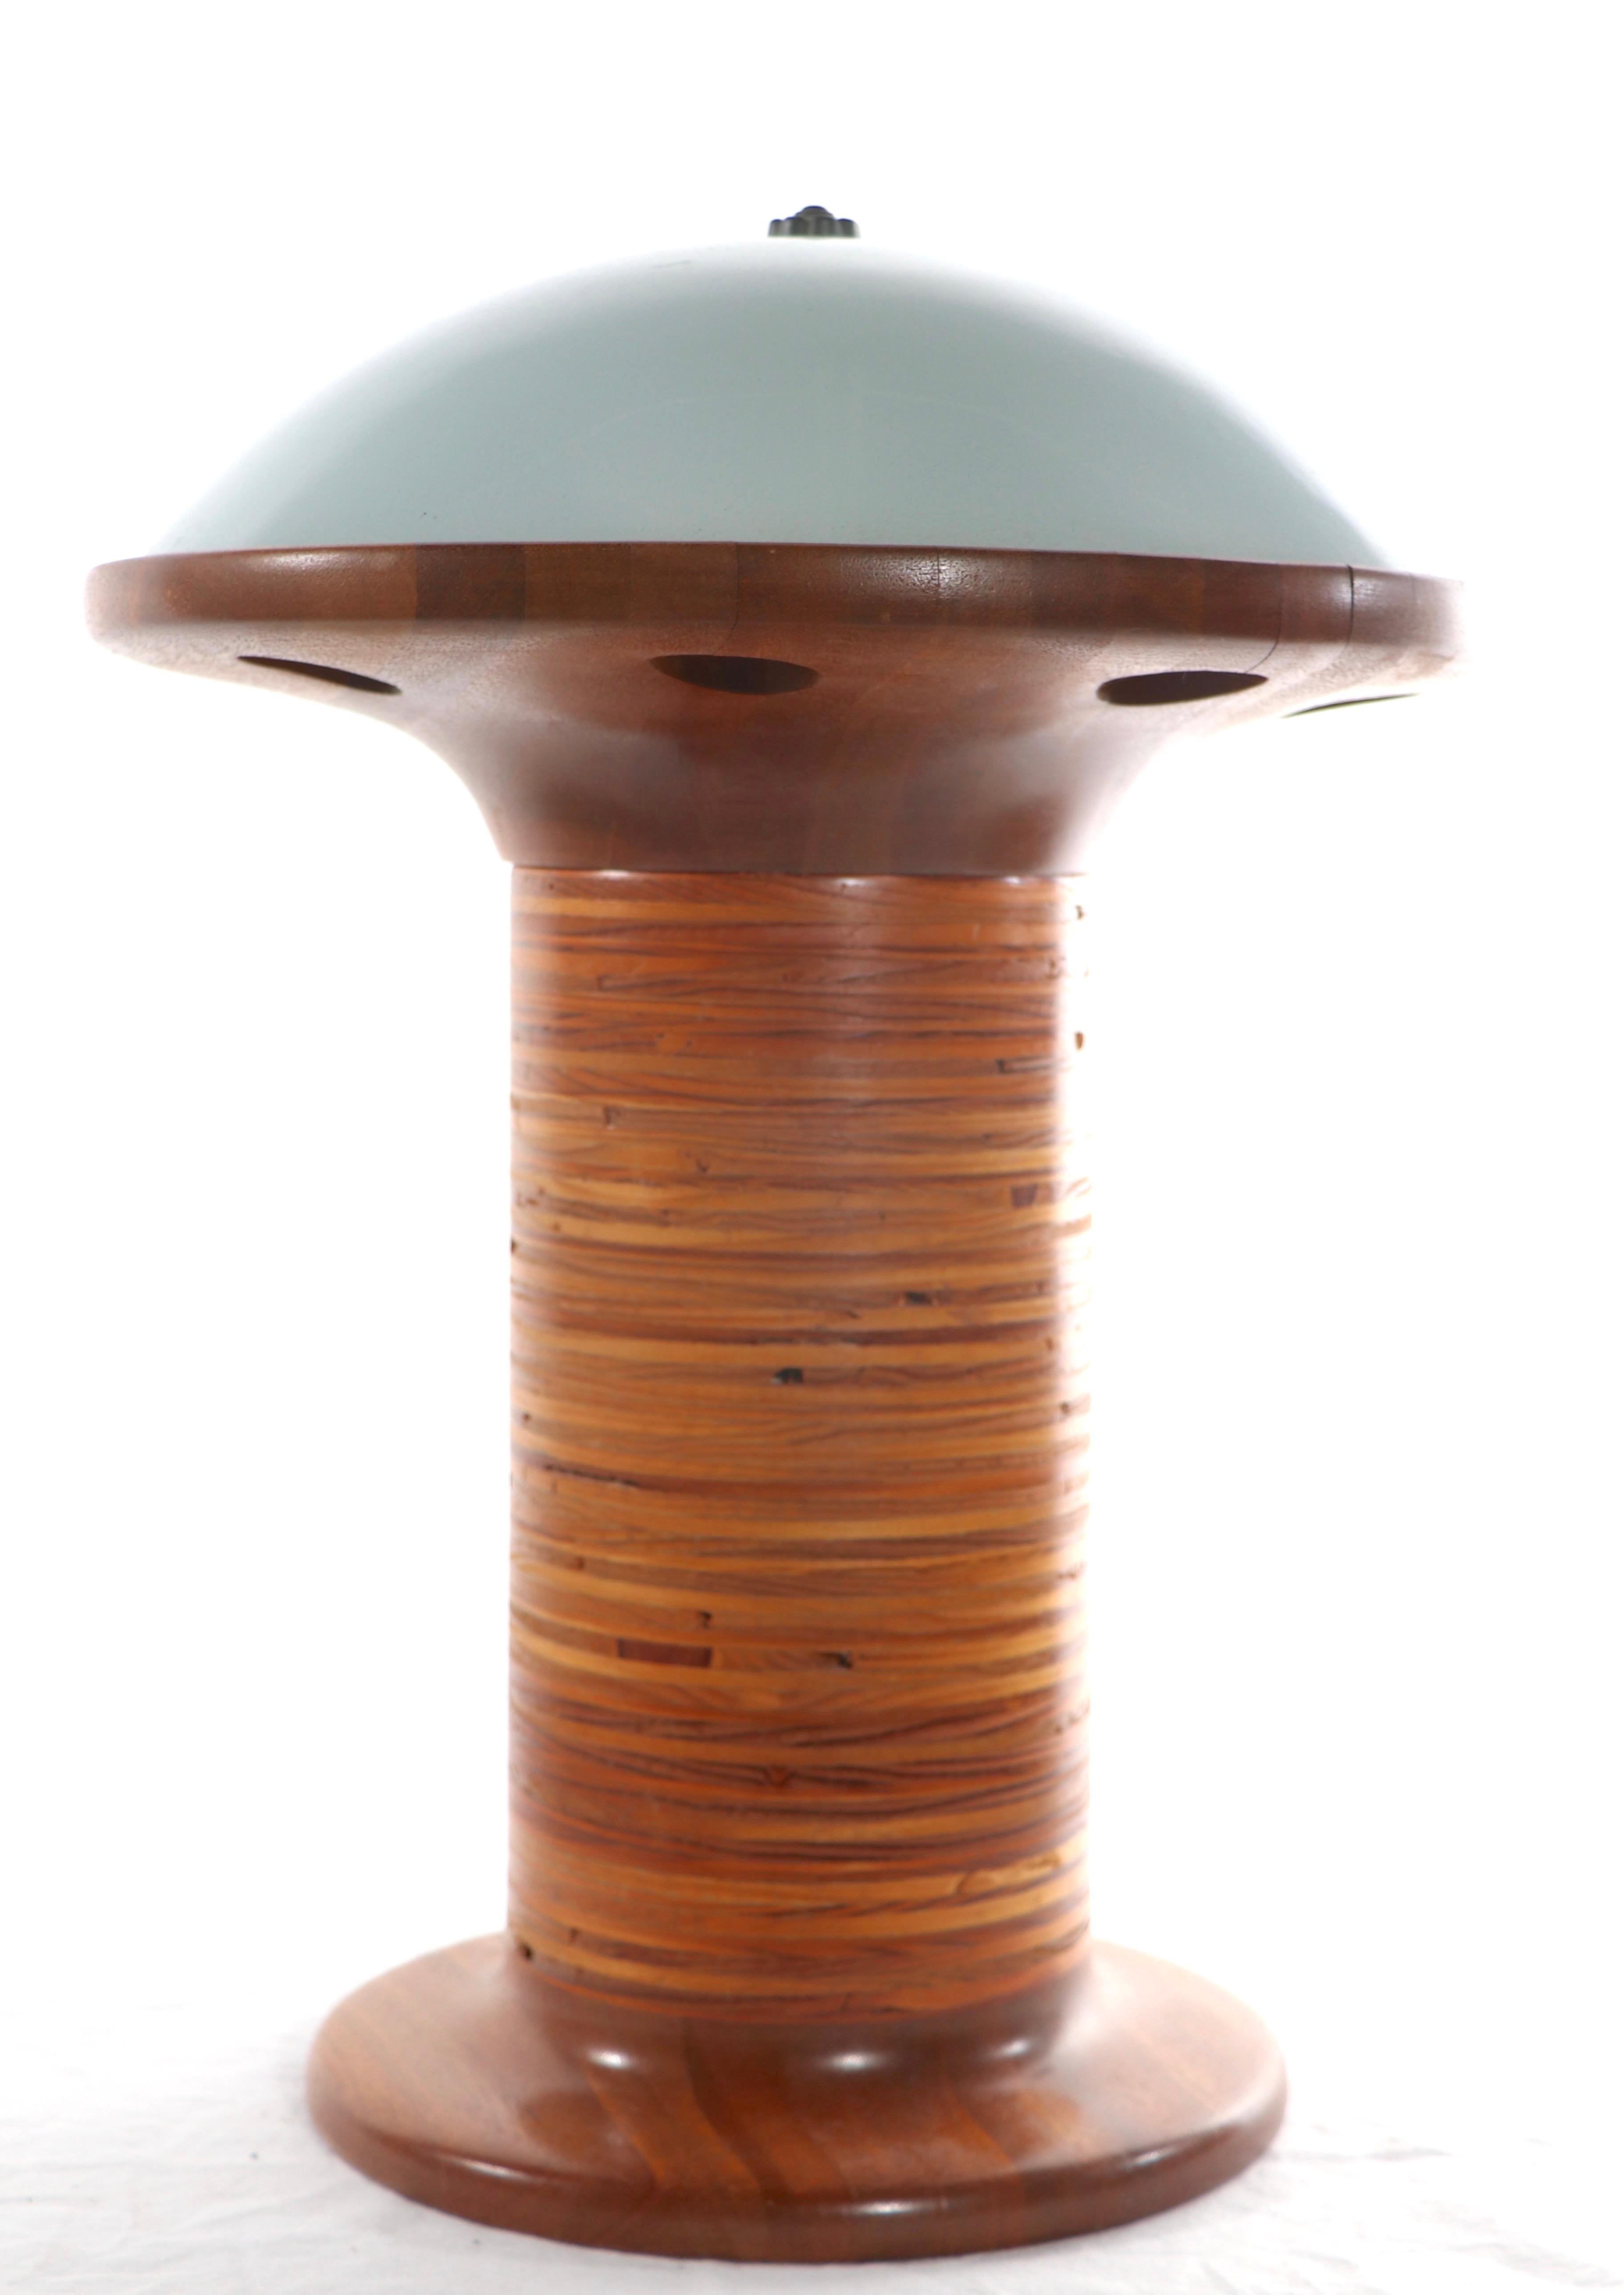 Unusual and possibly unique architectural design table lamp circa 1970's. The columnar base is constructed of stack wood disks, mounted on a solid turned wood base, with a space ship saucer like top, with glass top dome shade. The lamp is in